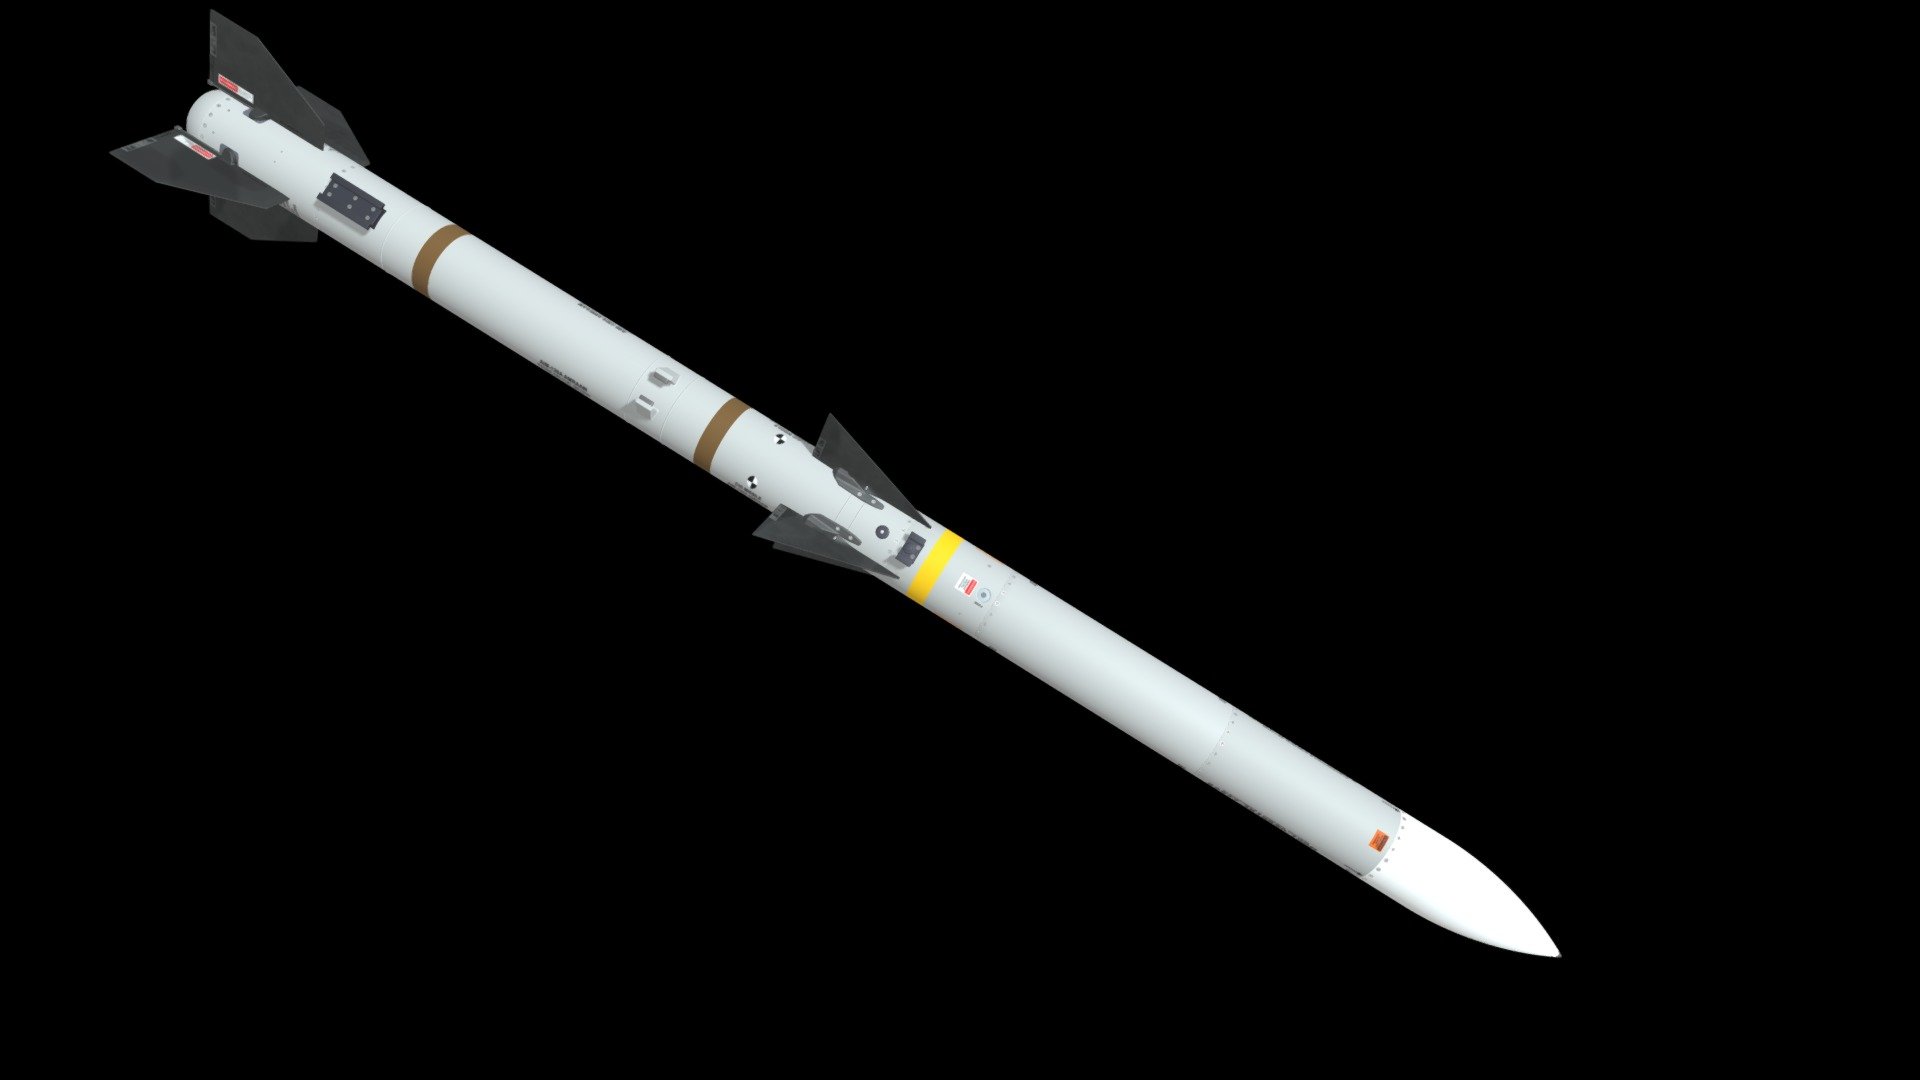 The AIM-120 Advanced Medium-Range Air-to-Air Missile, or AMRAAM (pronounced AM-ram), is an American beyond-visual-range air-to-air missile (BVRAAM) capable of all-weather day-and-night operations. Designed with a 7-inch (180 mm) diameter, and employing active transmit-receive radar guidance instead of semi-active receive-only radar guidance, it has the advantage of being a fire-and-forget weapon when compared to the previous generation Sparrow missiles. When an AMRAAM missile is launched, NATO pilots use the brevity code Fox Three
(Wikipedia) - AIM-120 AMRAAM - 3D model by Edgar Brito (@e.brito) 3d model